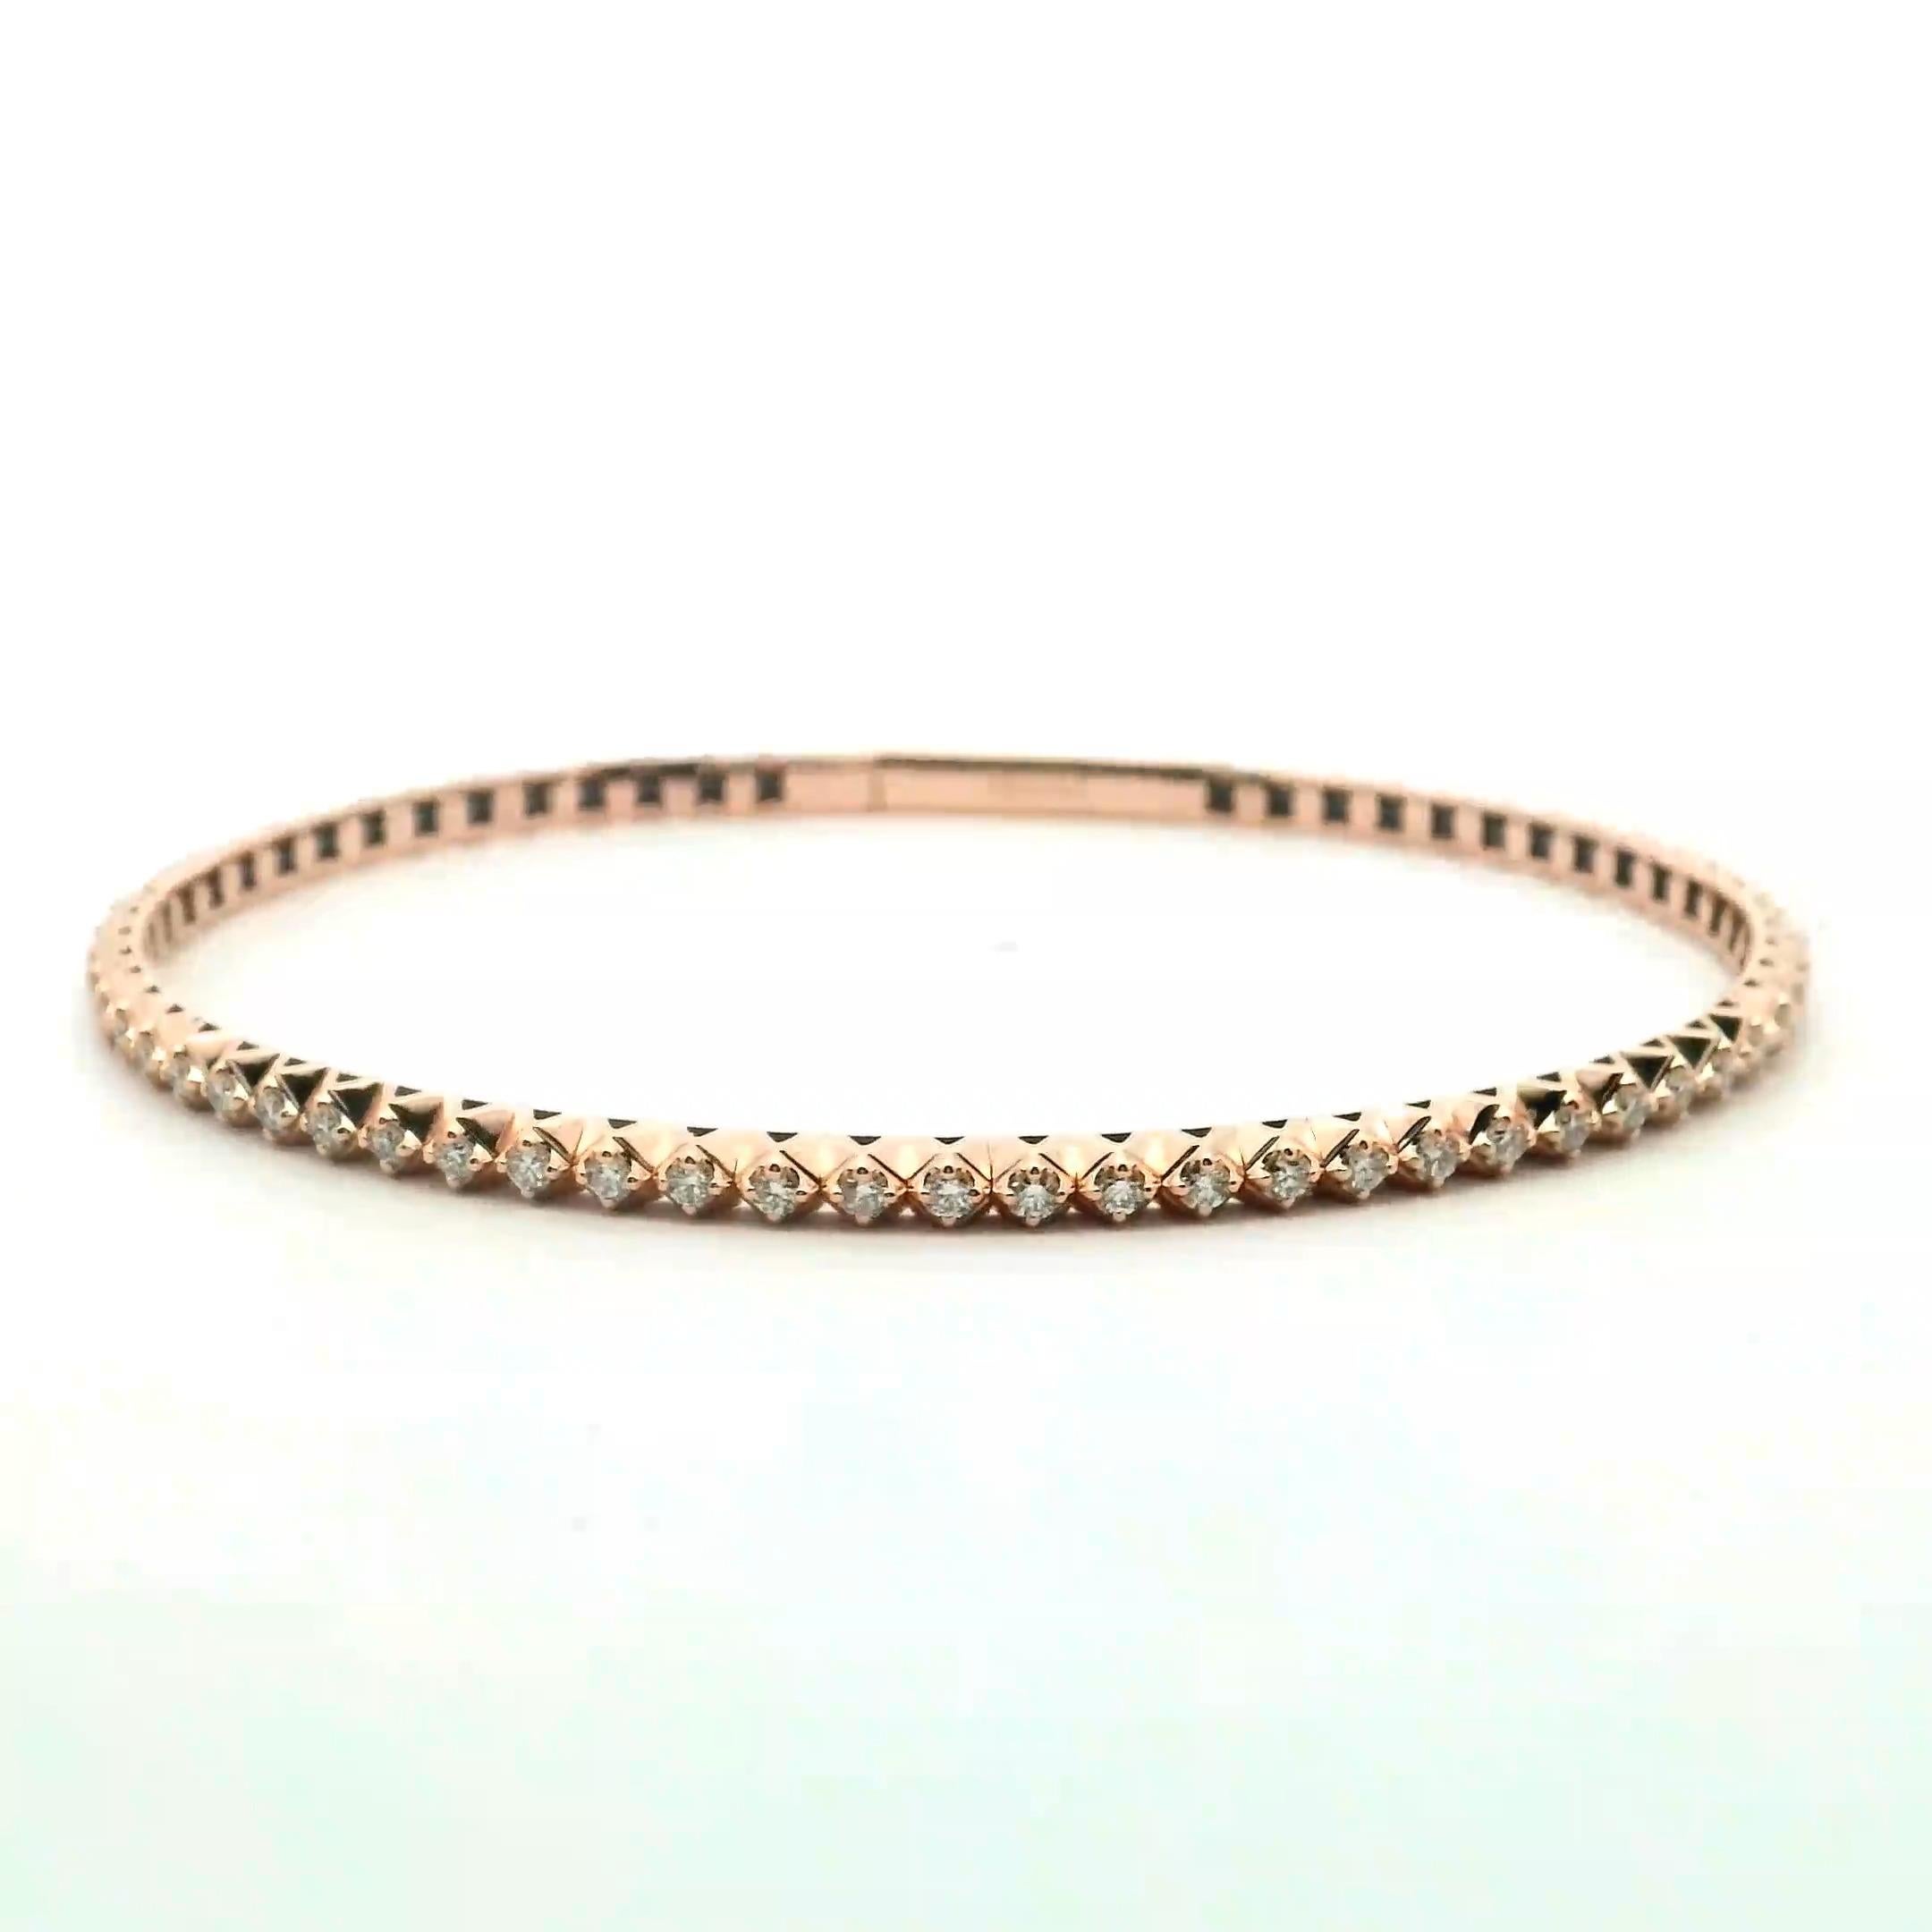 Deck your wrist in sheer elegance with our exquisite 14K rose gold bracelet, lavishly adorned with brilliant-cut diamonds. This magnificent piece effortlessly blends opulence and style to bring you a timeless accessory that's sure to impress at